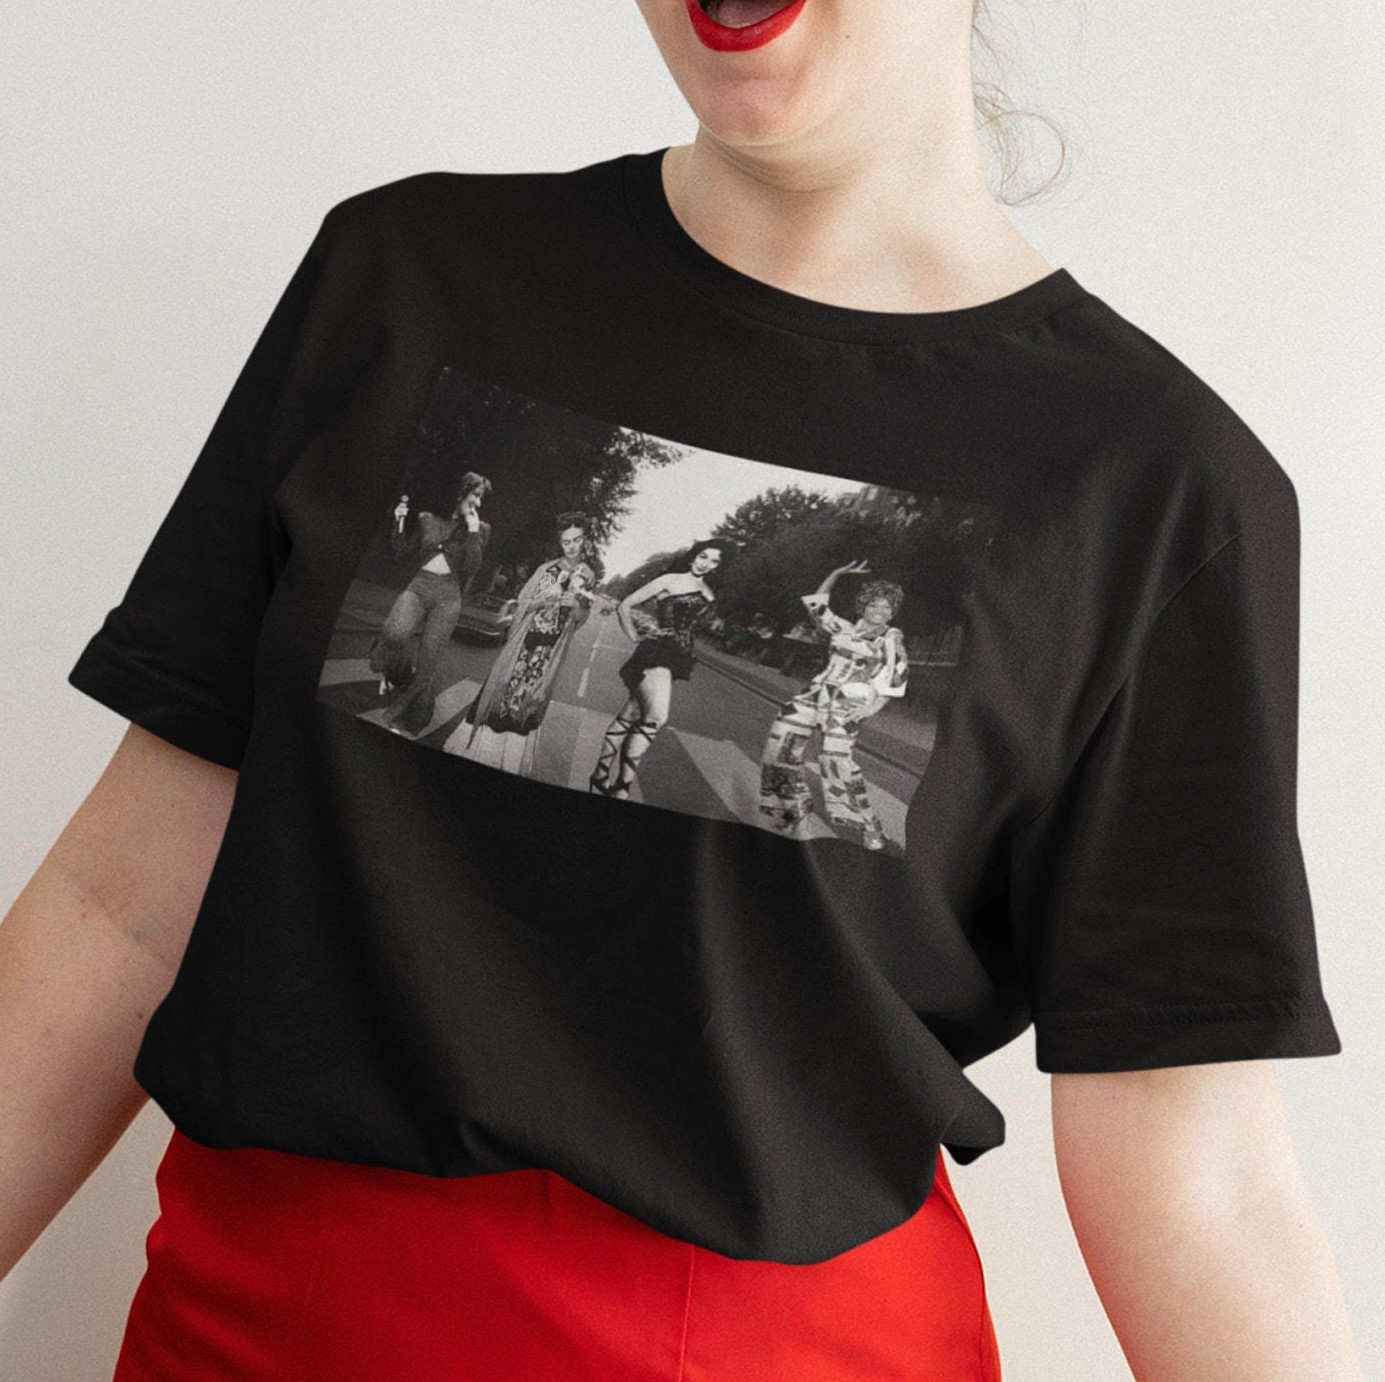 Frida Kahlo And Feminists The Abbey Road The Beatles Artist shirt